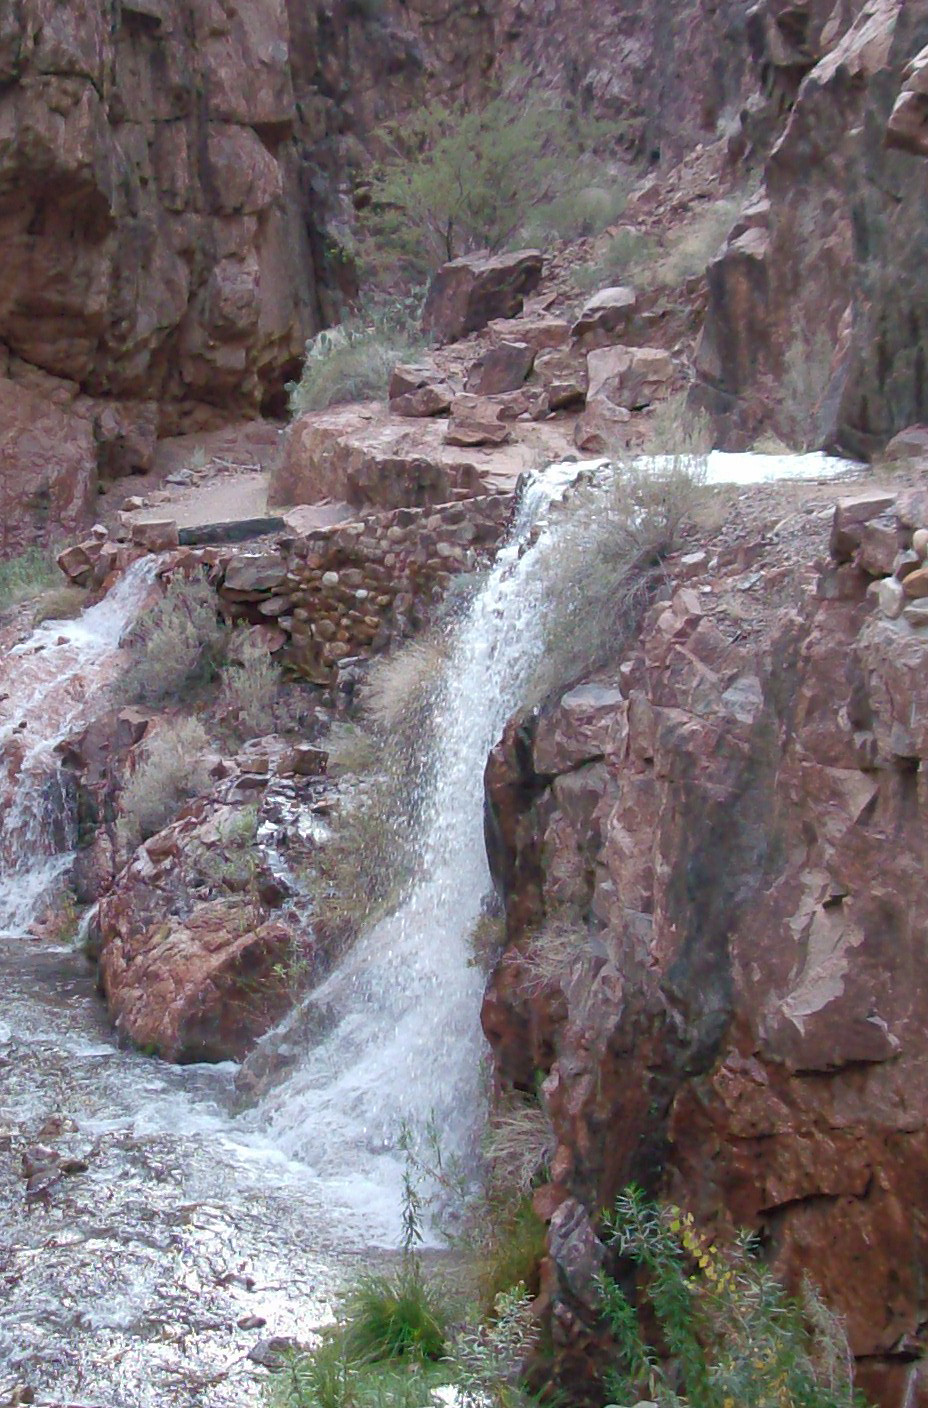 Water floods the North Kaibab Trail during a pipeline break incident.